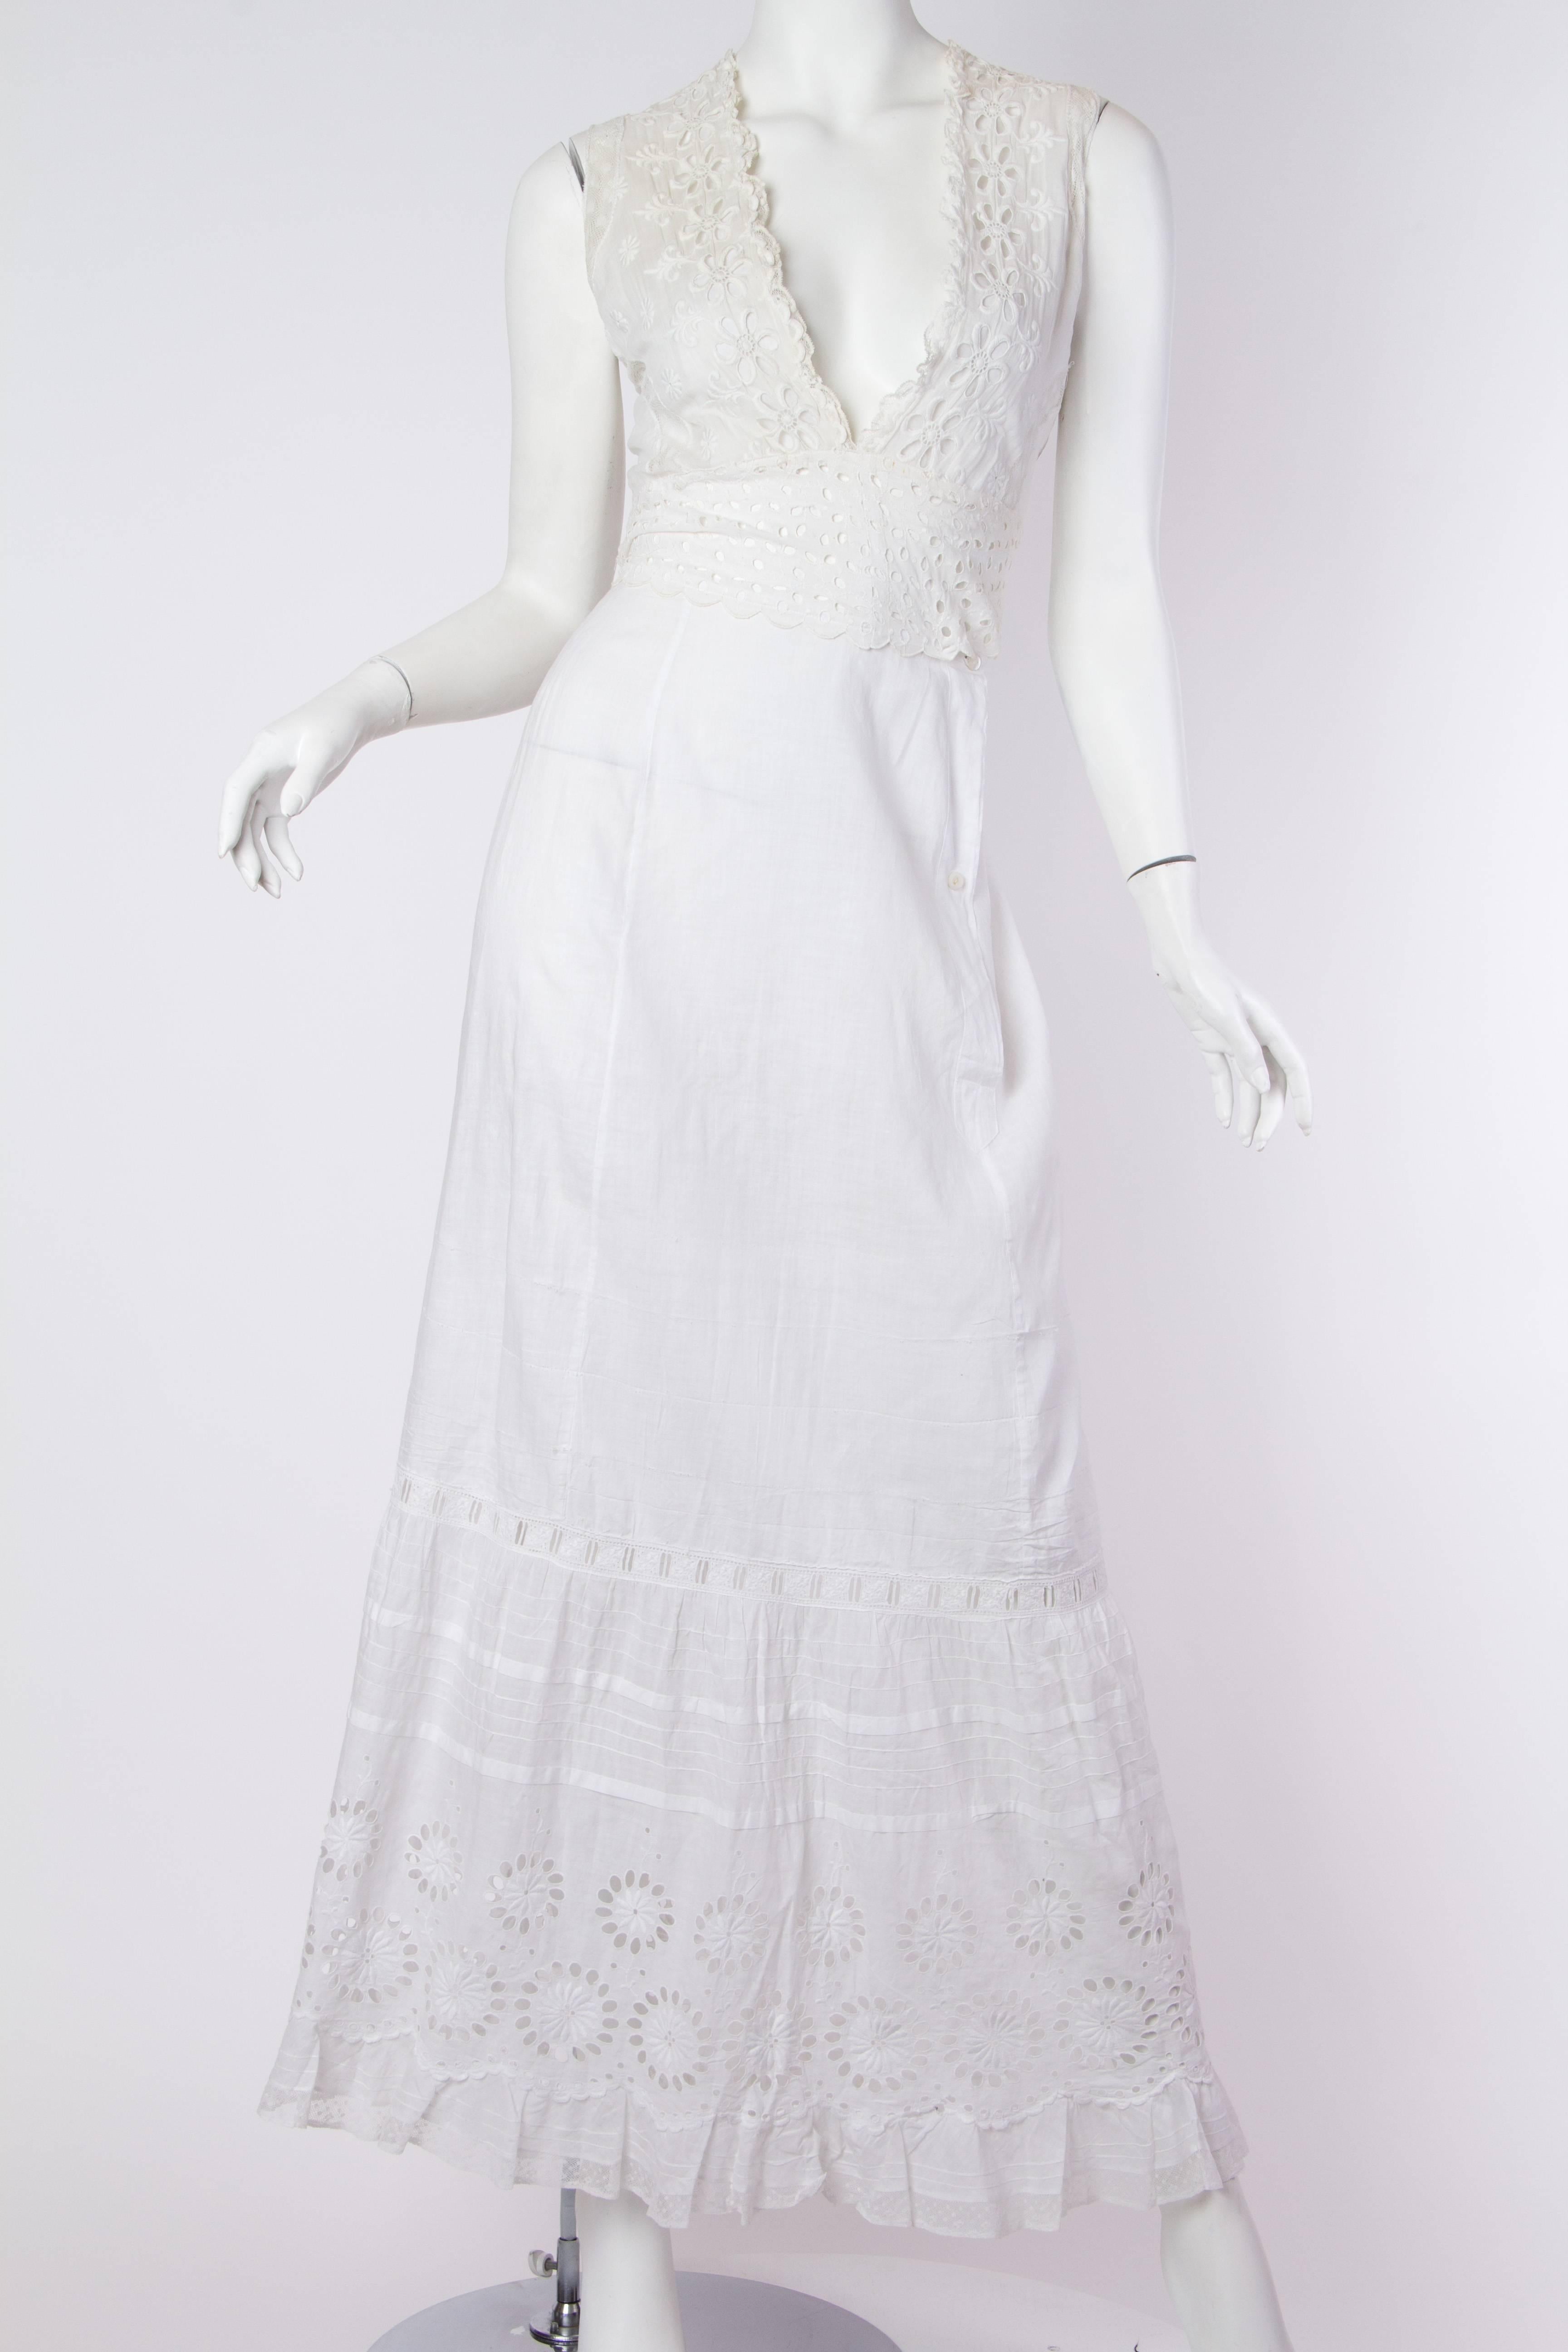 MORPHEW COLLECTION White Organic Cotton Eyelet Lace Maxi Dress Made From Victorian Hand Embroidered
MORPHEW COLLECTION is made entirely by hand in our NYC Ateliér of rare antique materials sourced from around the globe. Our sustainable vintage